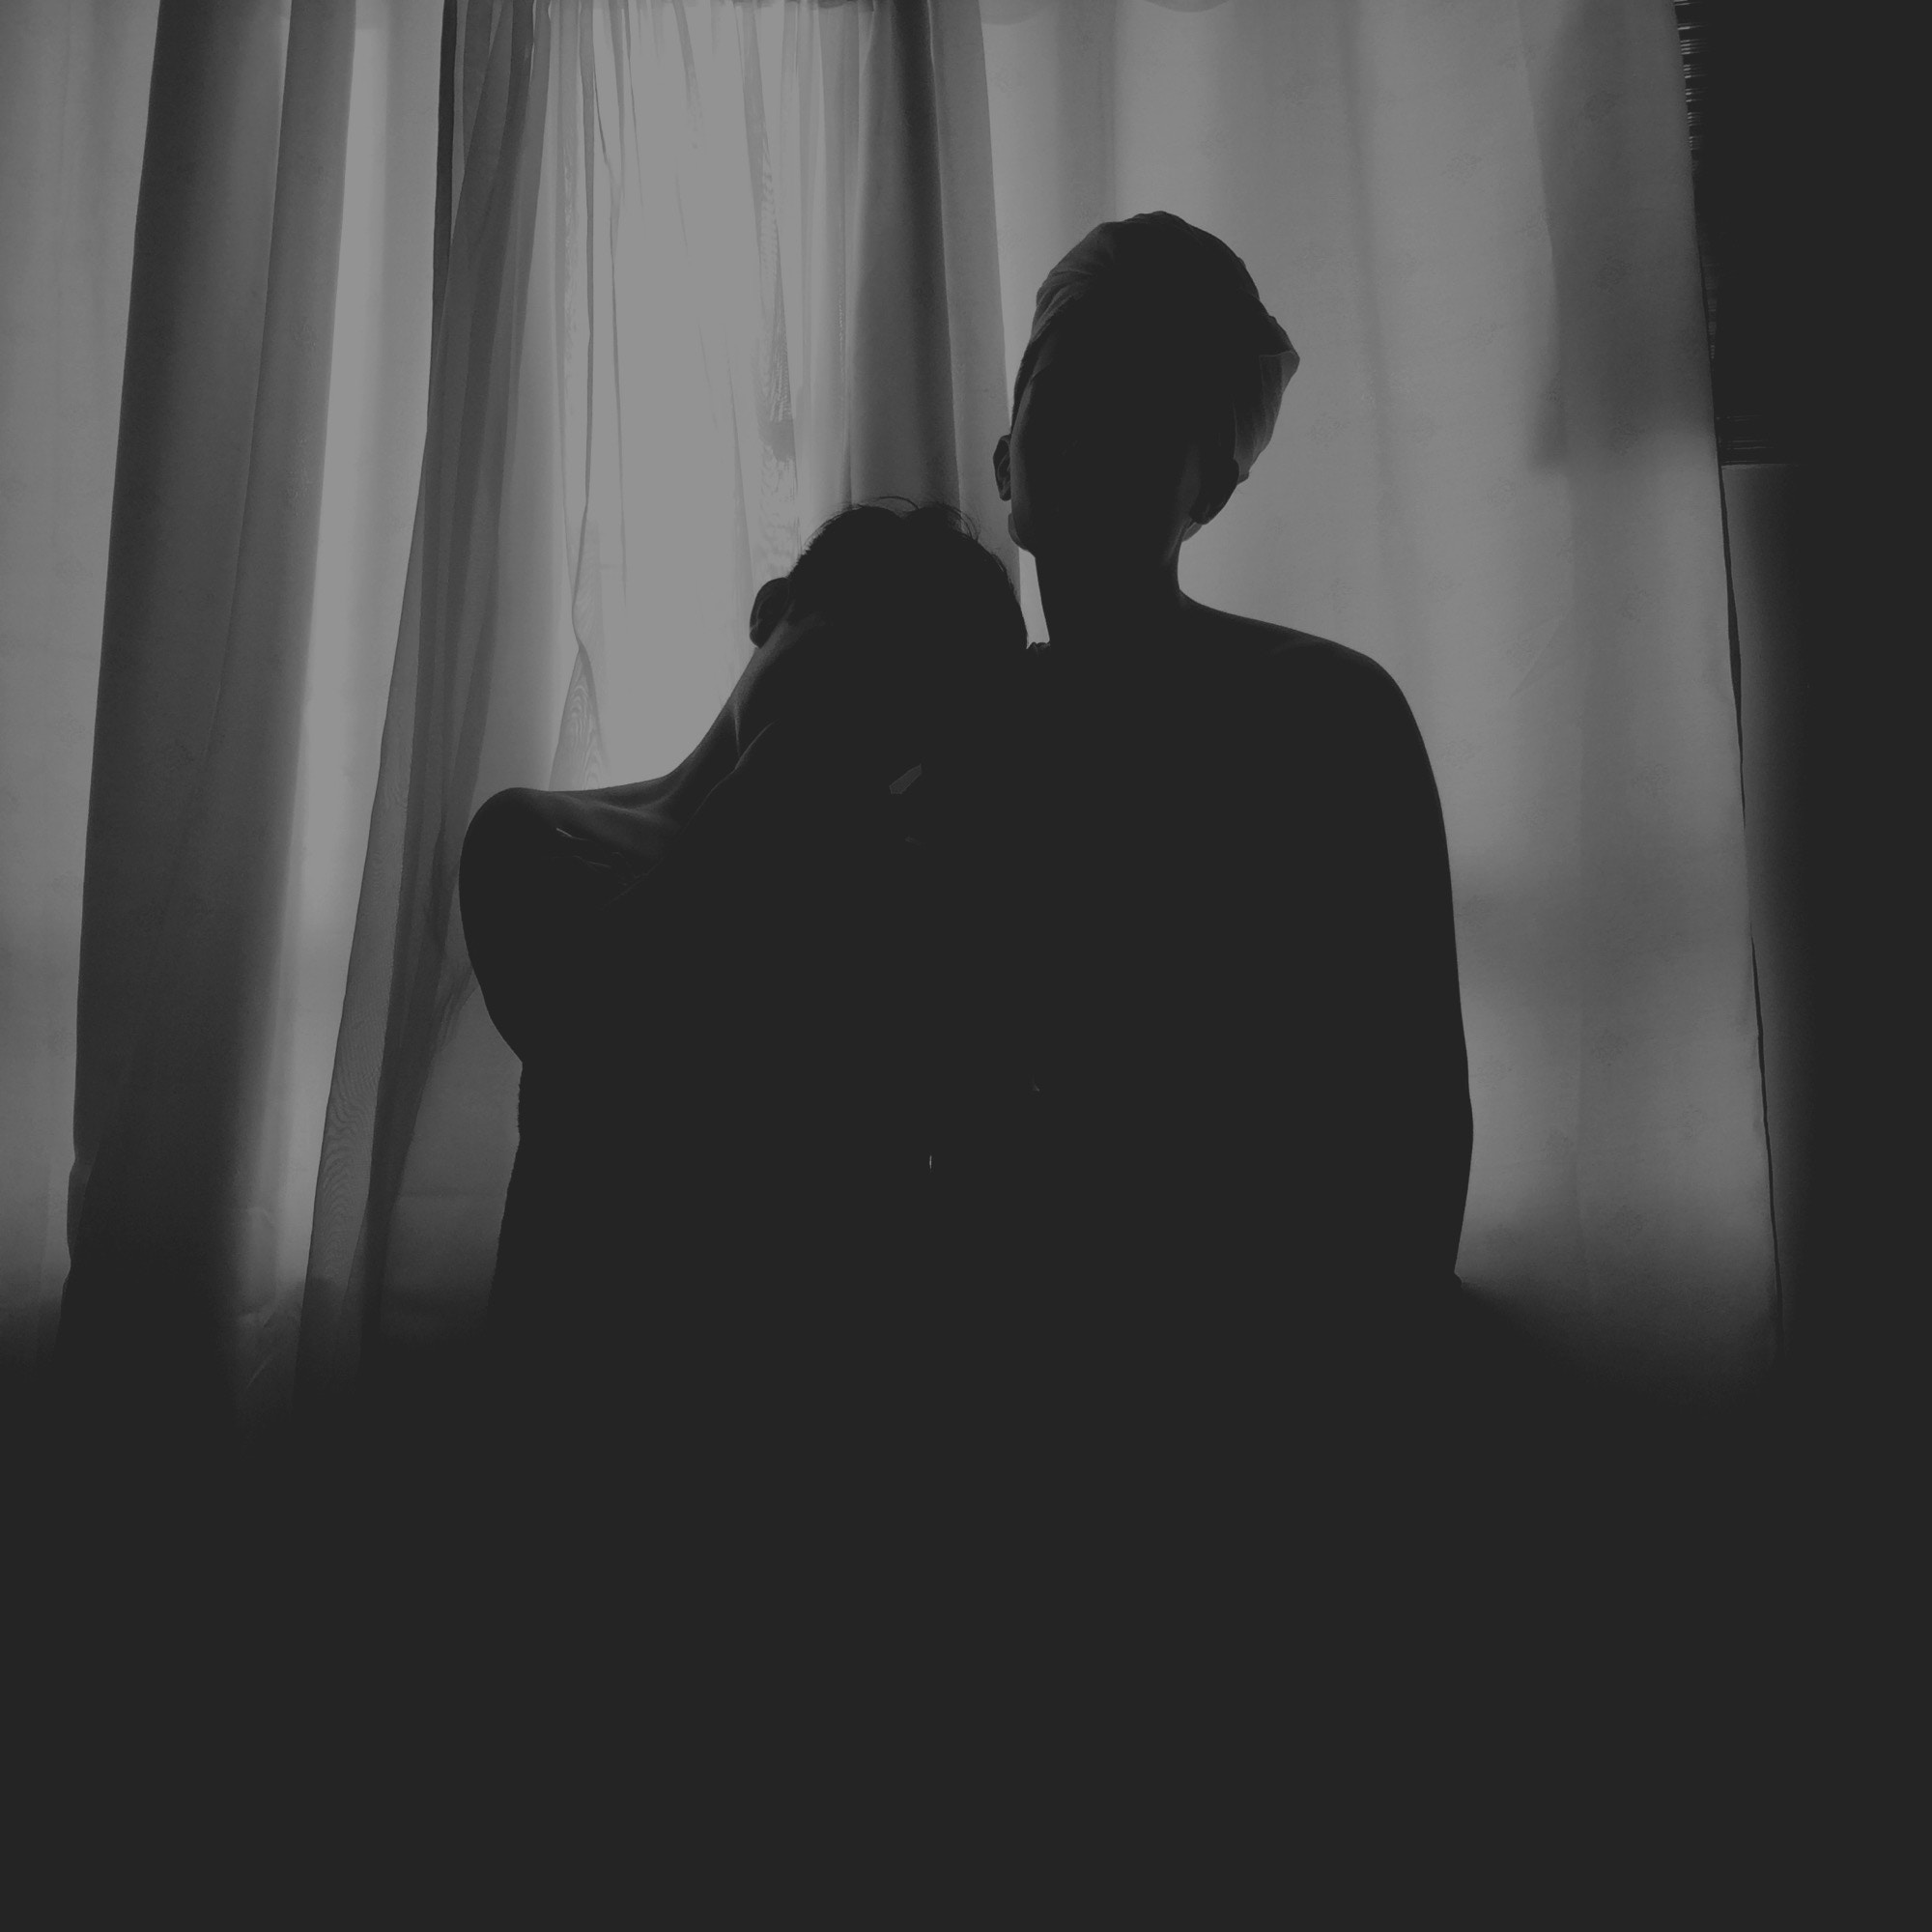 X couple wallpaper people backgrounds love lgbtqium silhouette dark curtain creative mons images darkness gay people contrast light bw people wallpapers lovewin shadow blackandwhite people silhouette bla